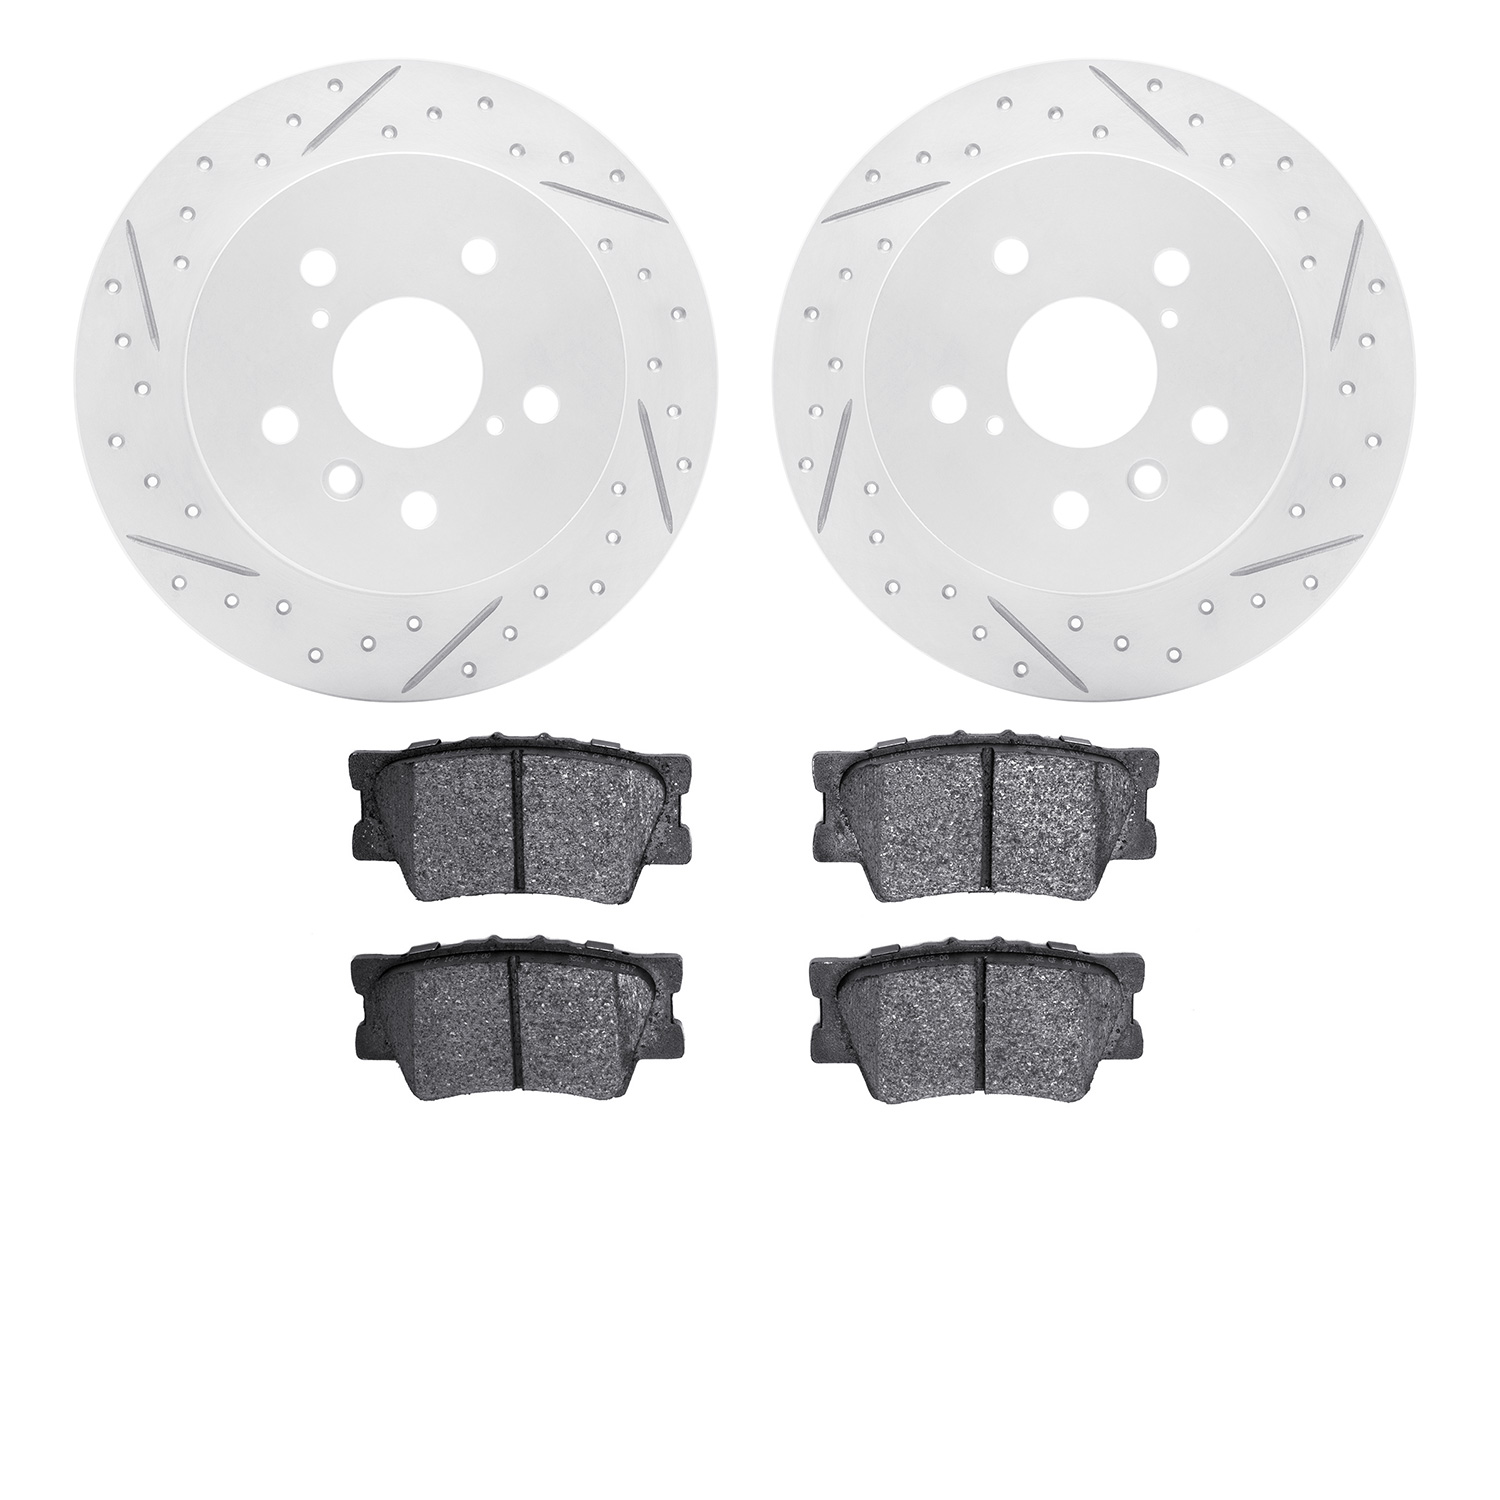 2502-76056 Geoperformance Drilled/Slotted Rotors w/5000 Advanced Brake Pads Kit, Fits Select Lexus/Toyota/Scion, Position: Rear